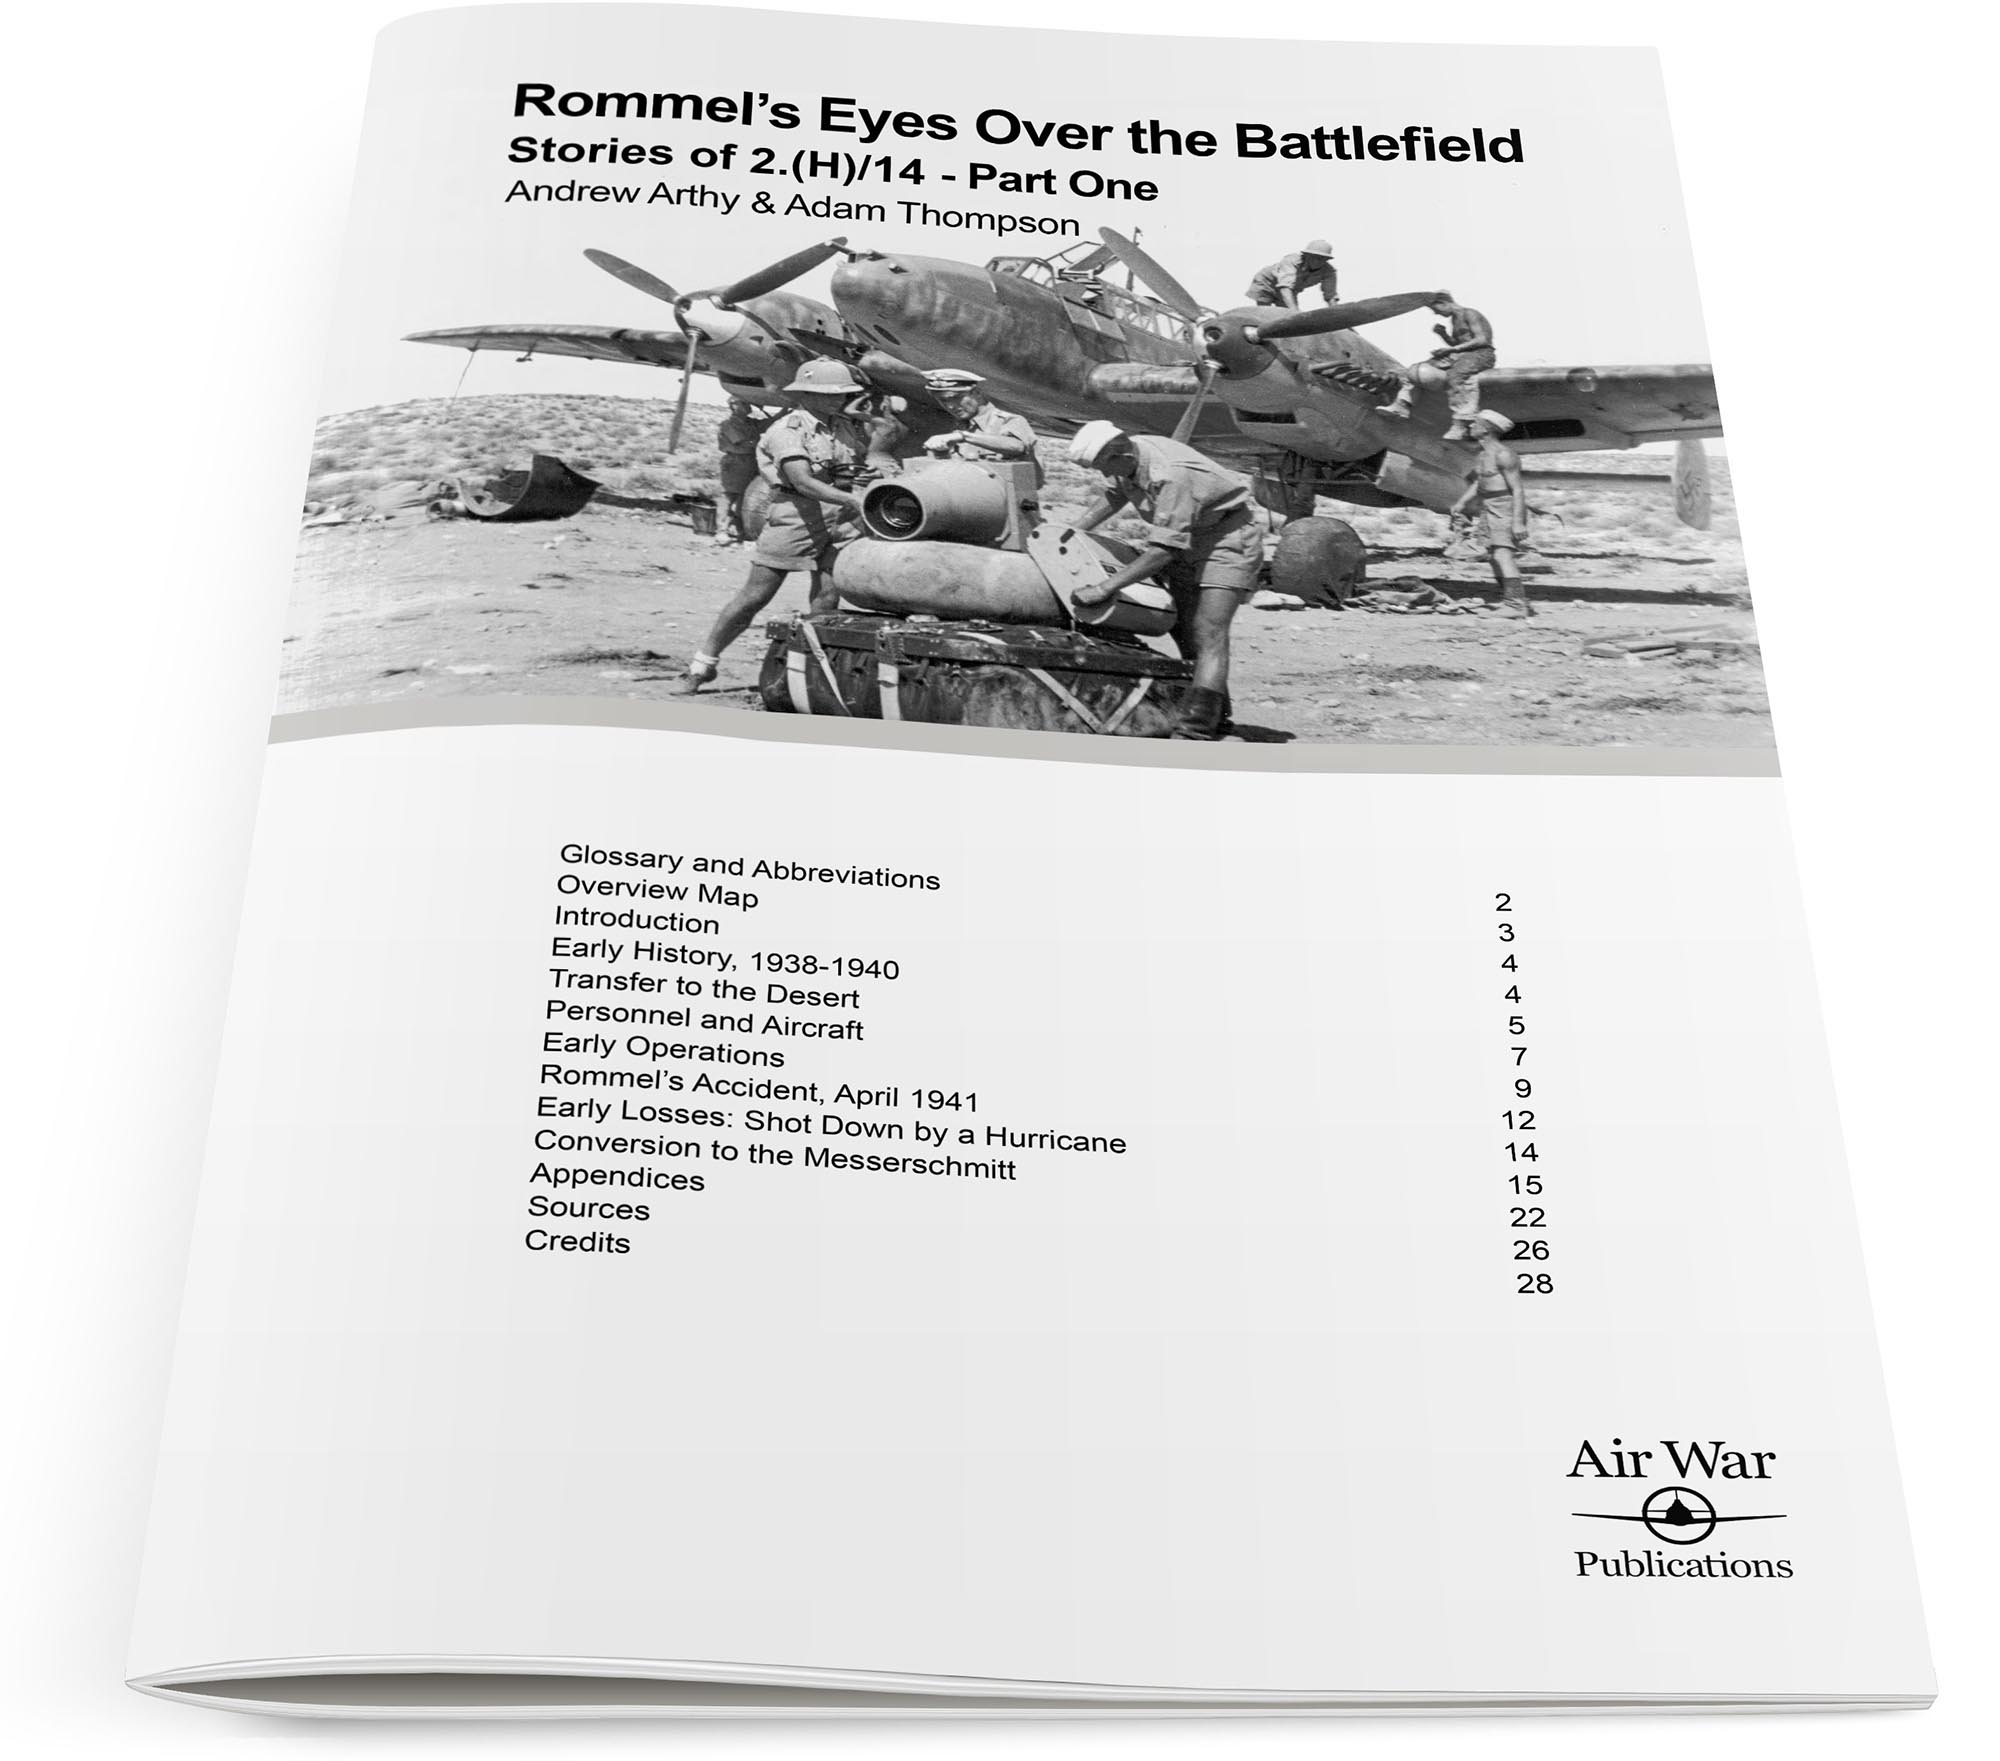 Ernst Kupfer eArticle Available - Air War Publications